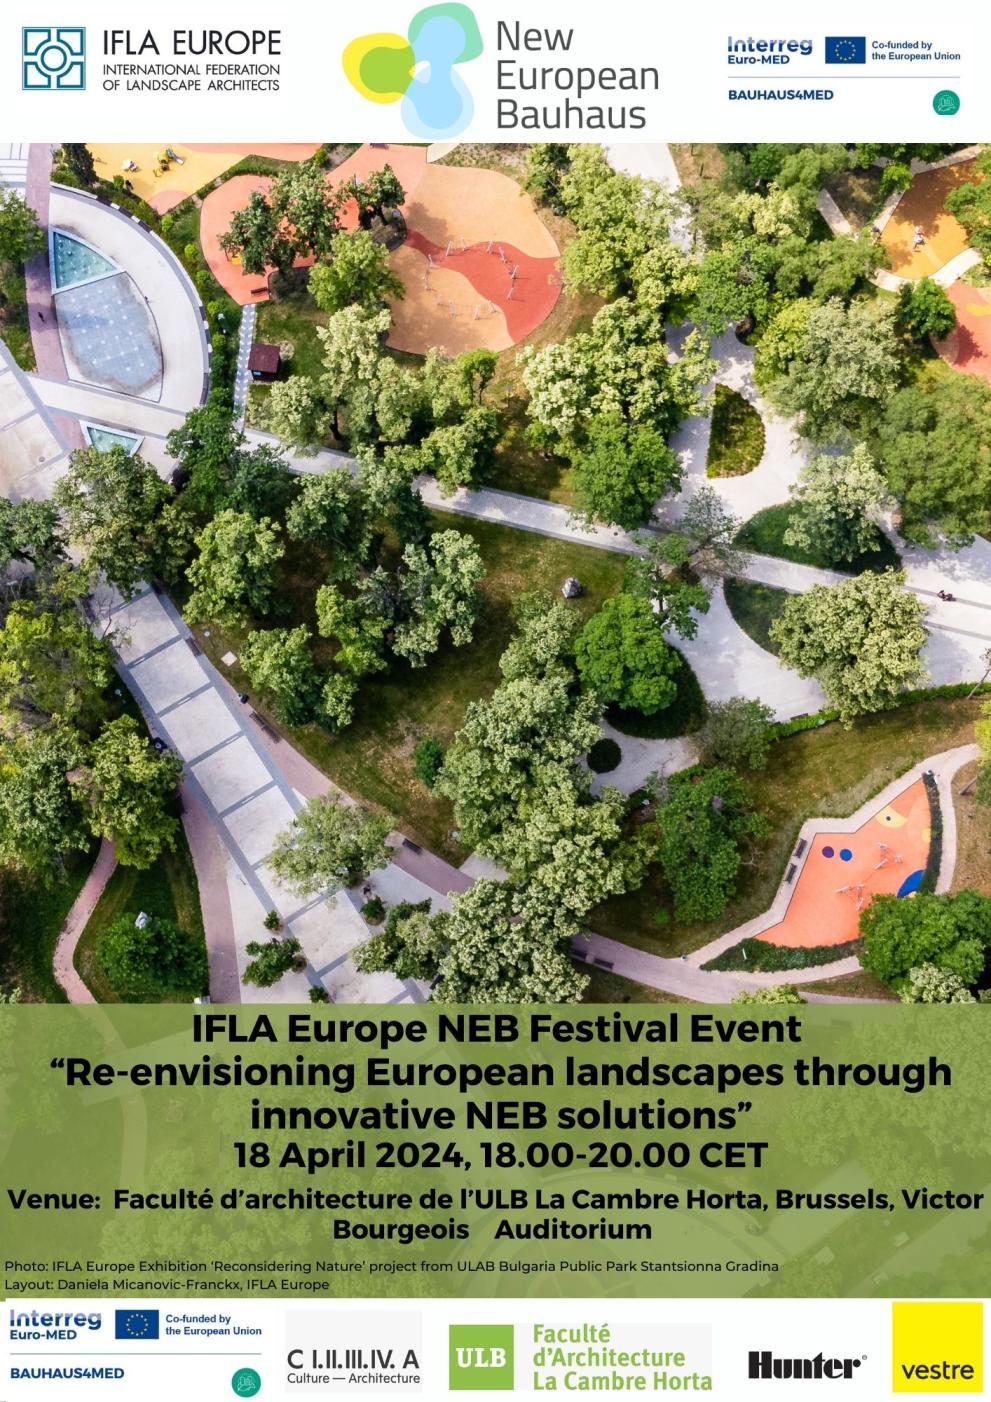 Conference 'Re-envisioning European landscapes through innovative NEB solutions'